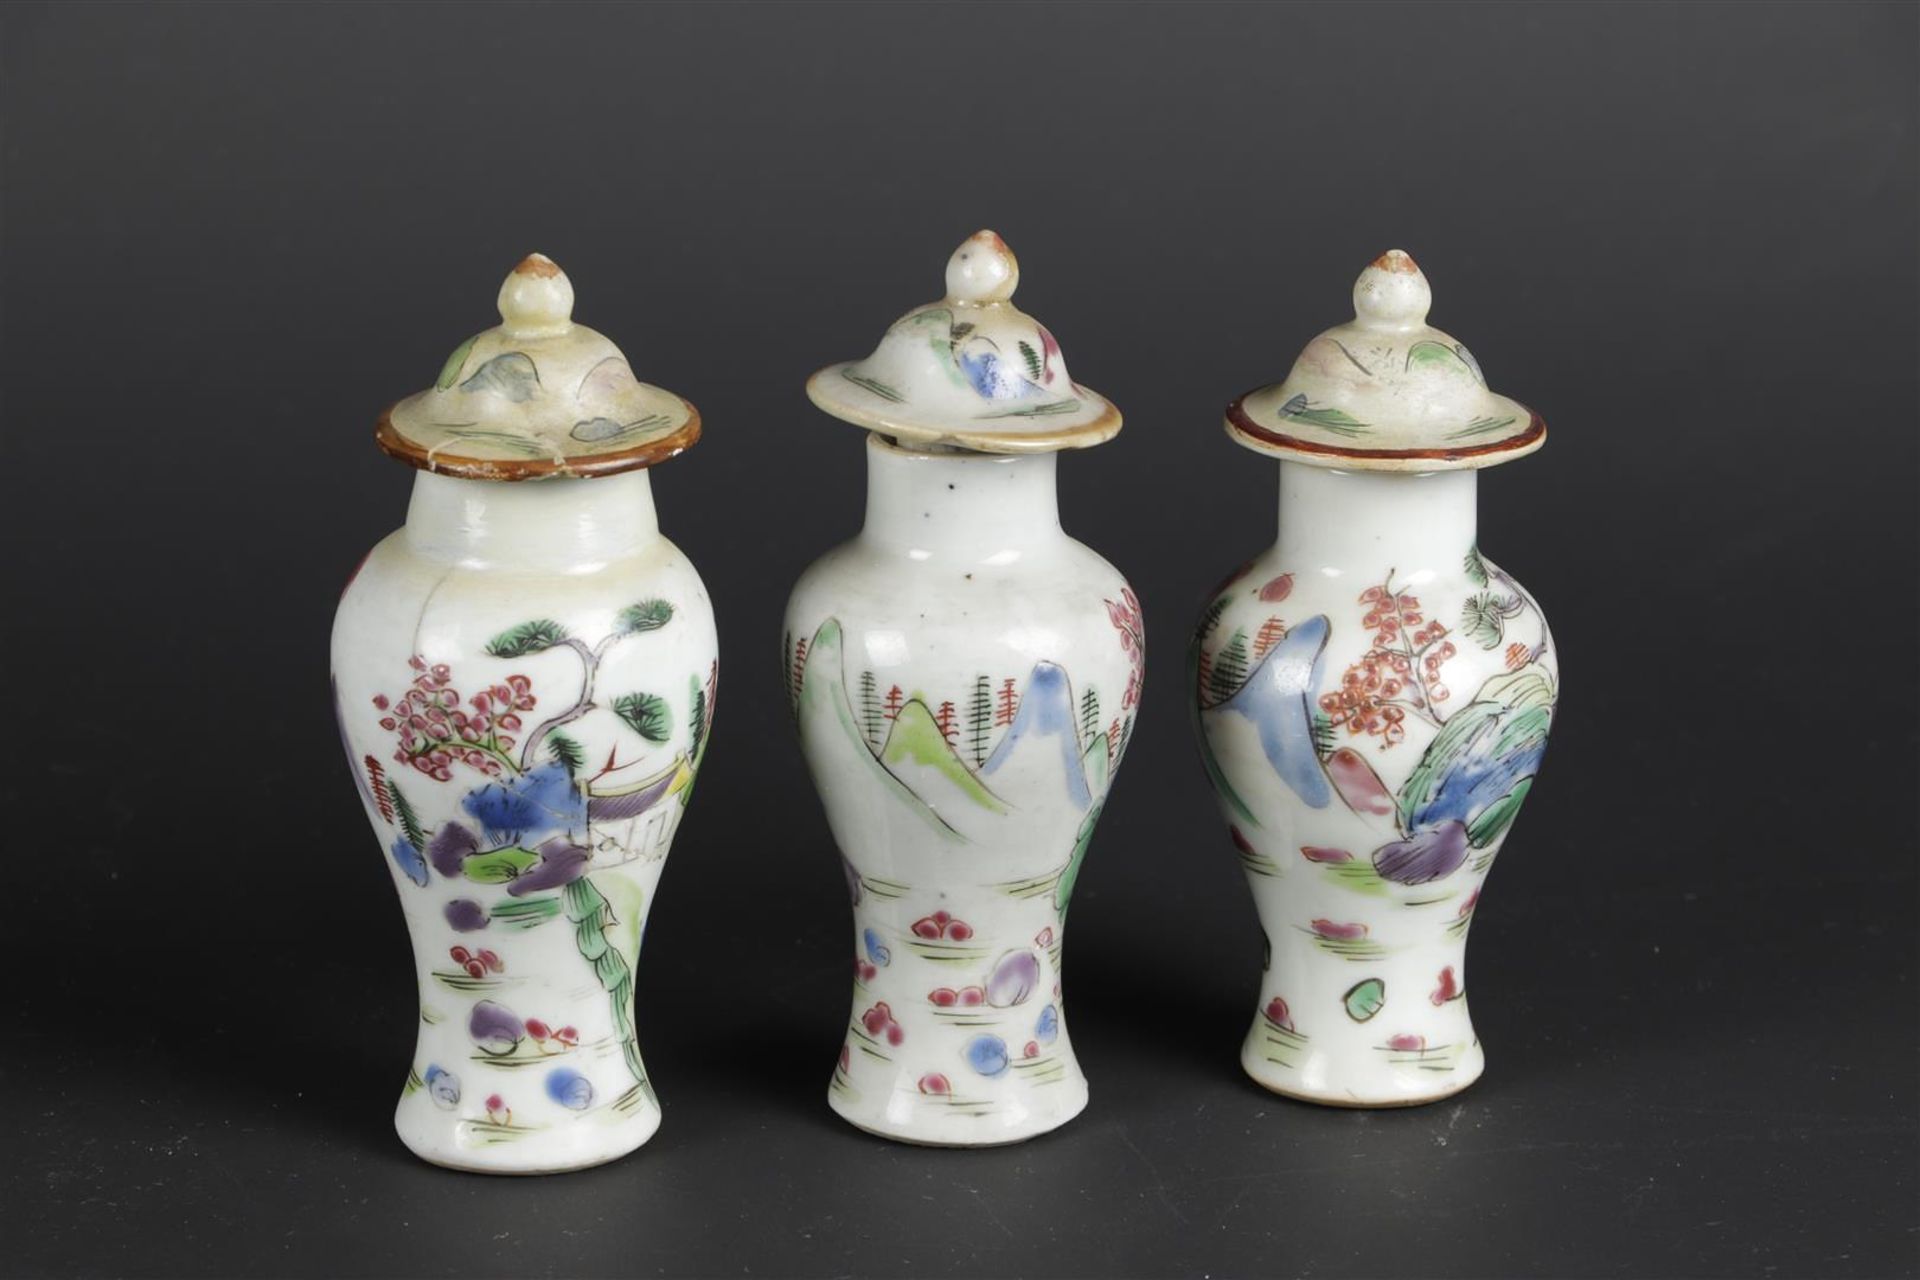 Three porcelain Famille Rose lidded jars with mountain landscape decoration. China, Qianlong.